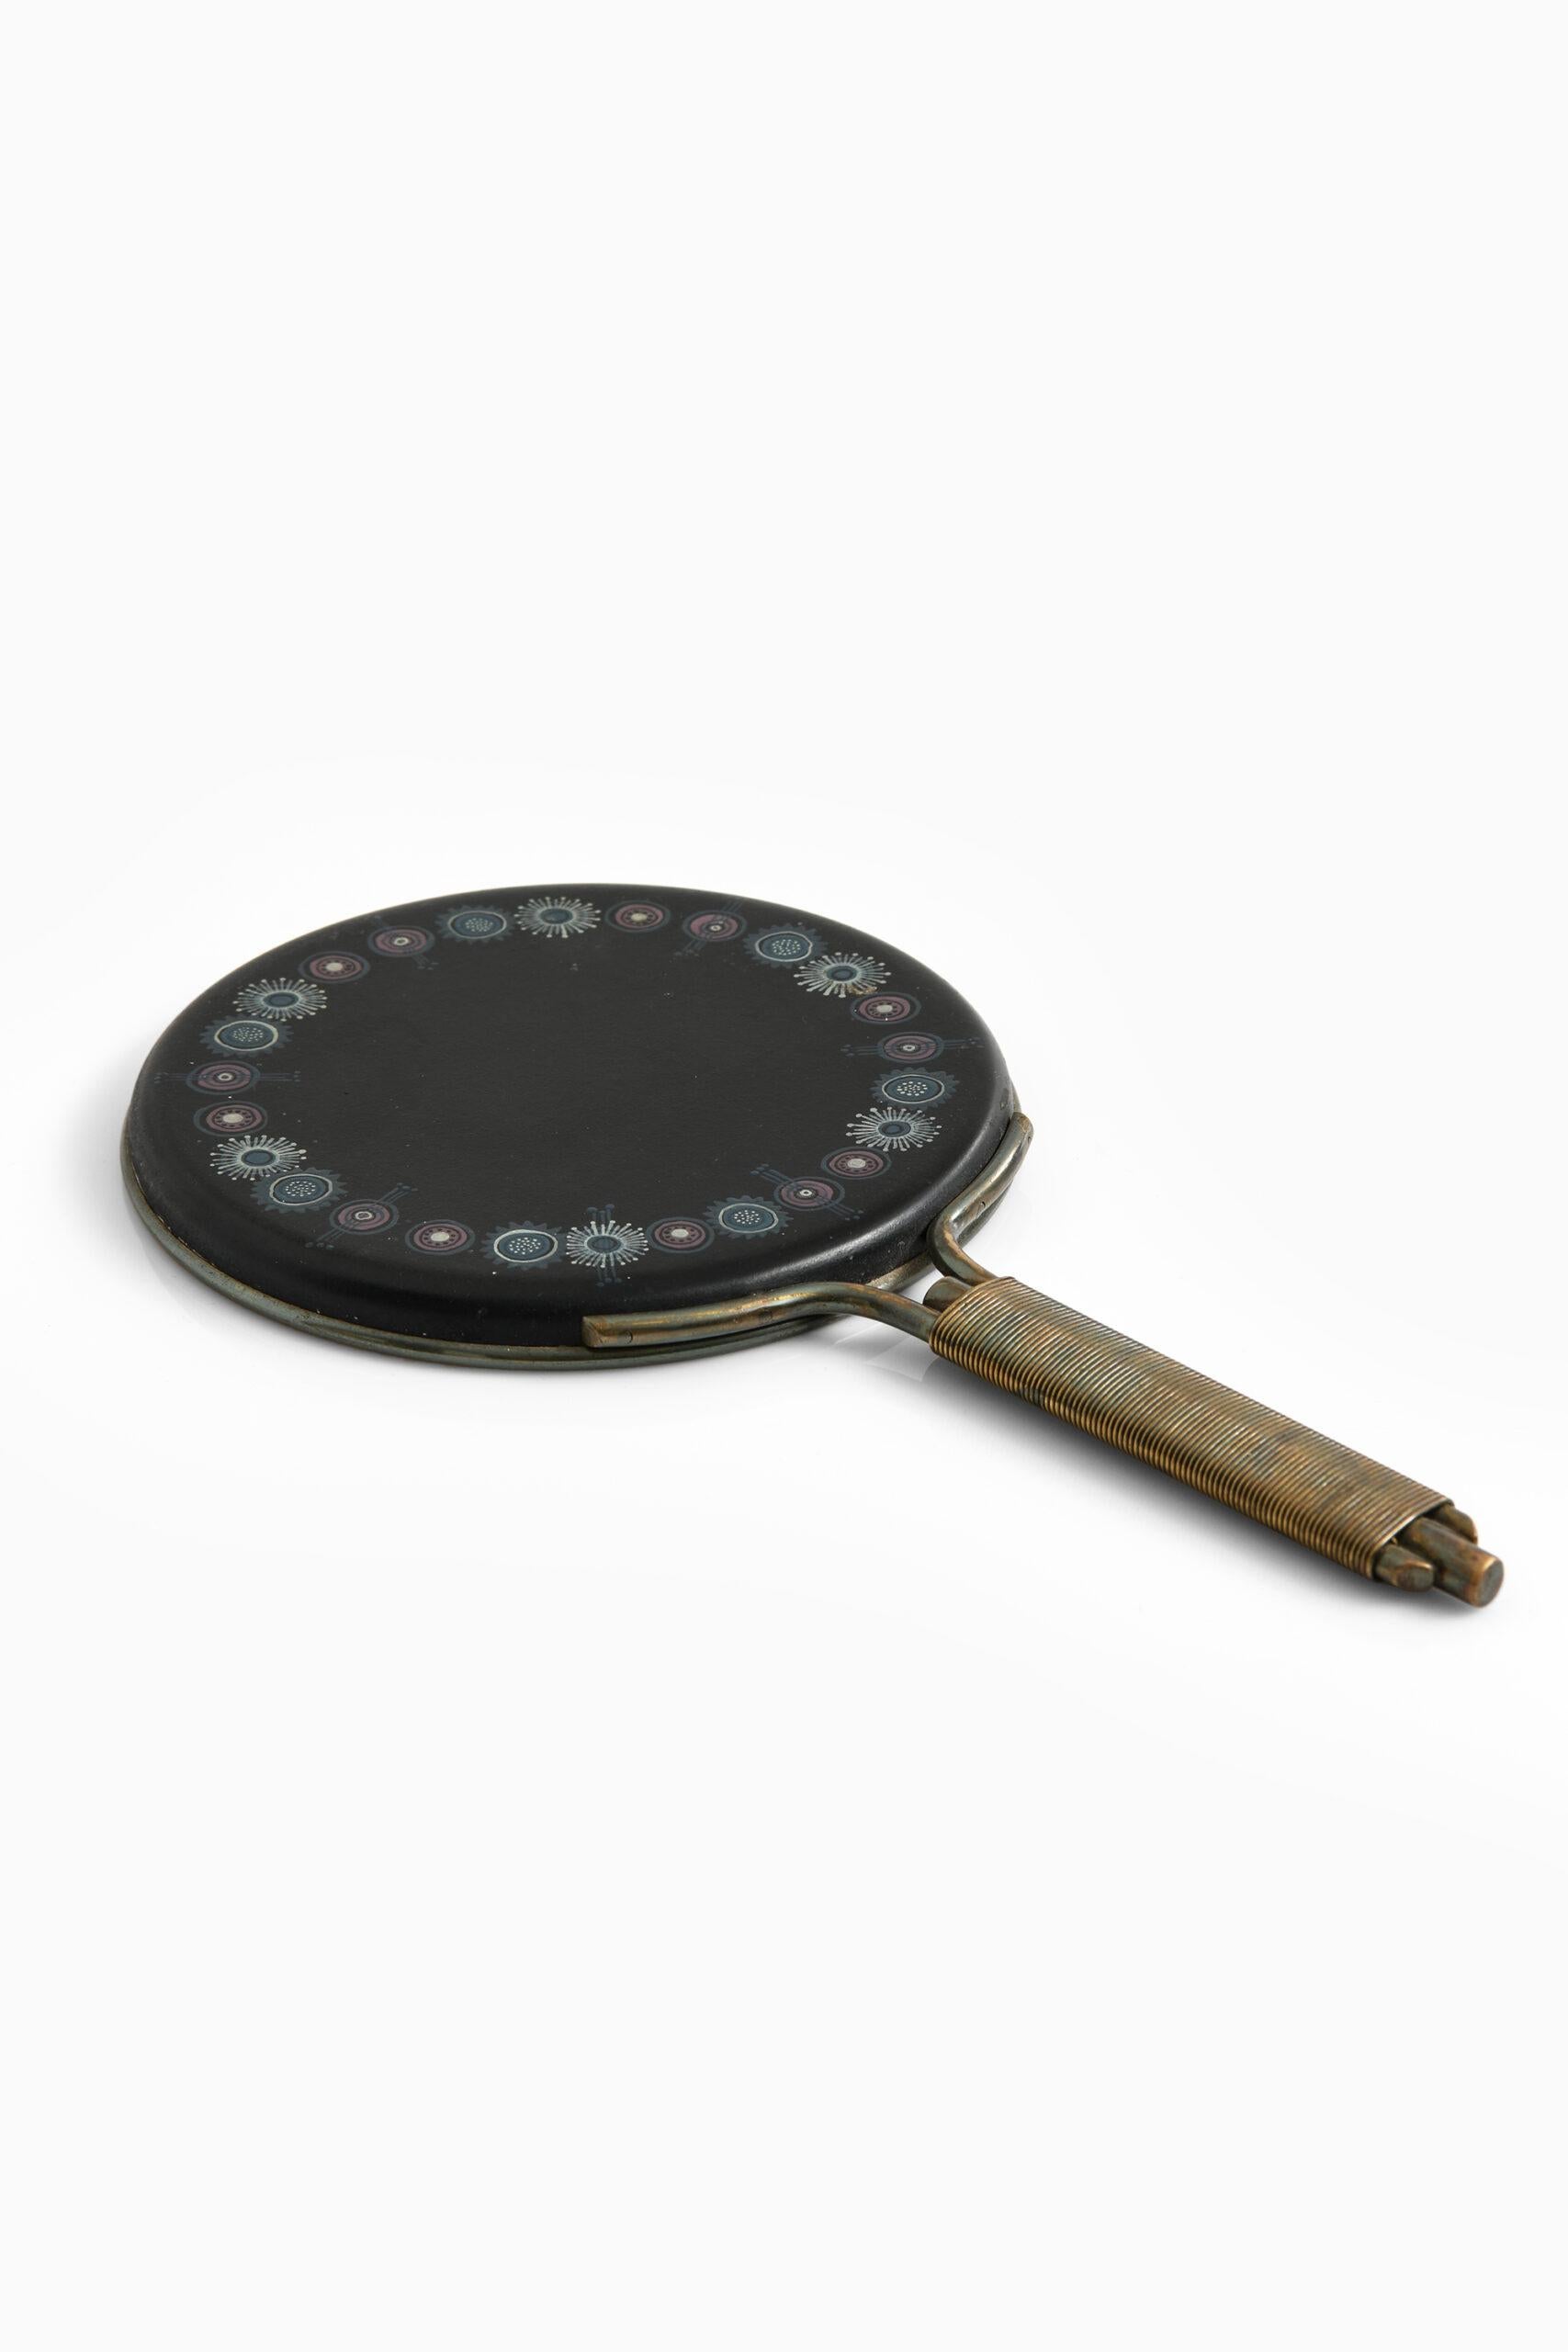 Scandinavian Modern Hand Mirror Attributed to Hans-Agne Jakobsson For Sale